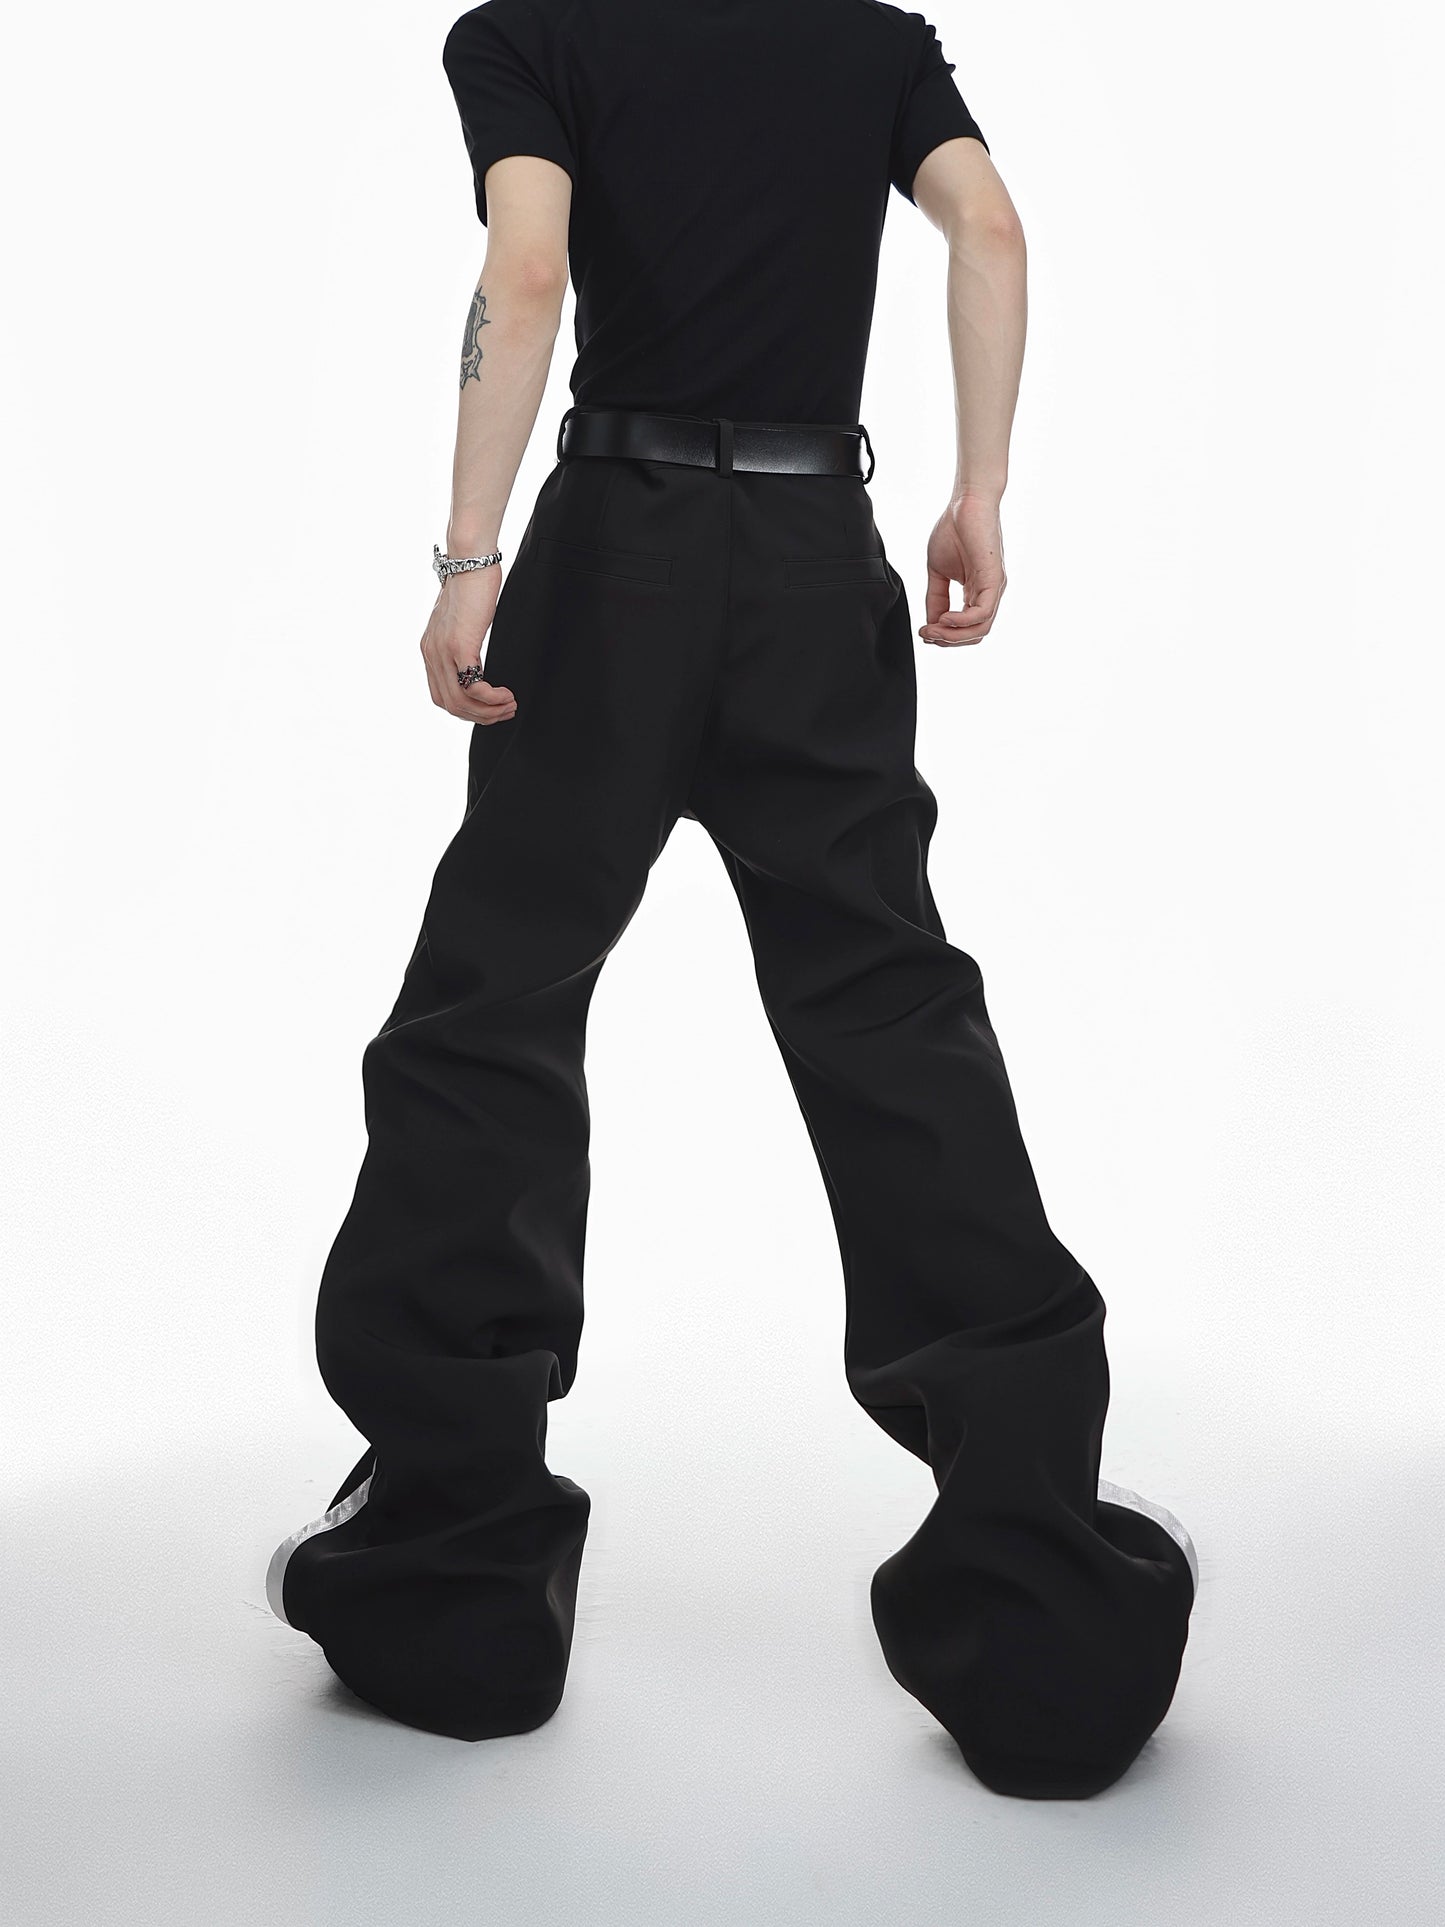 CulturE niche three-dimensional line design trousers metal button casual micro boot pants simple high-end trousers